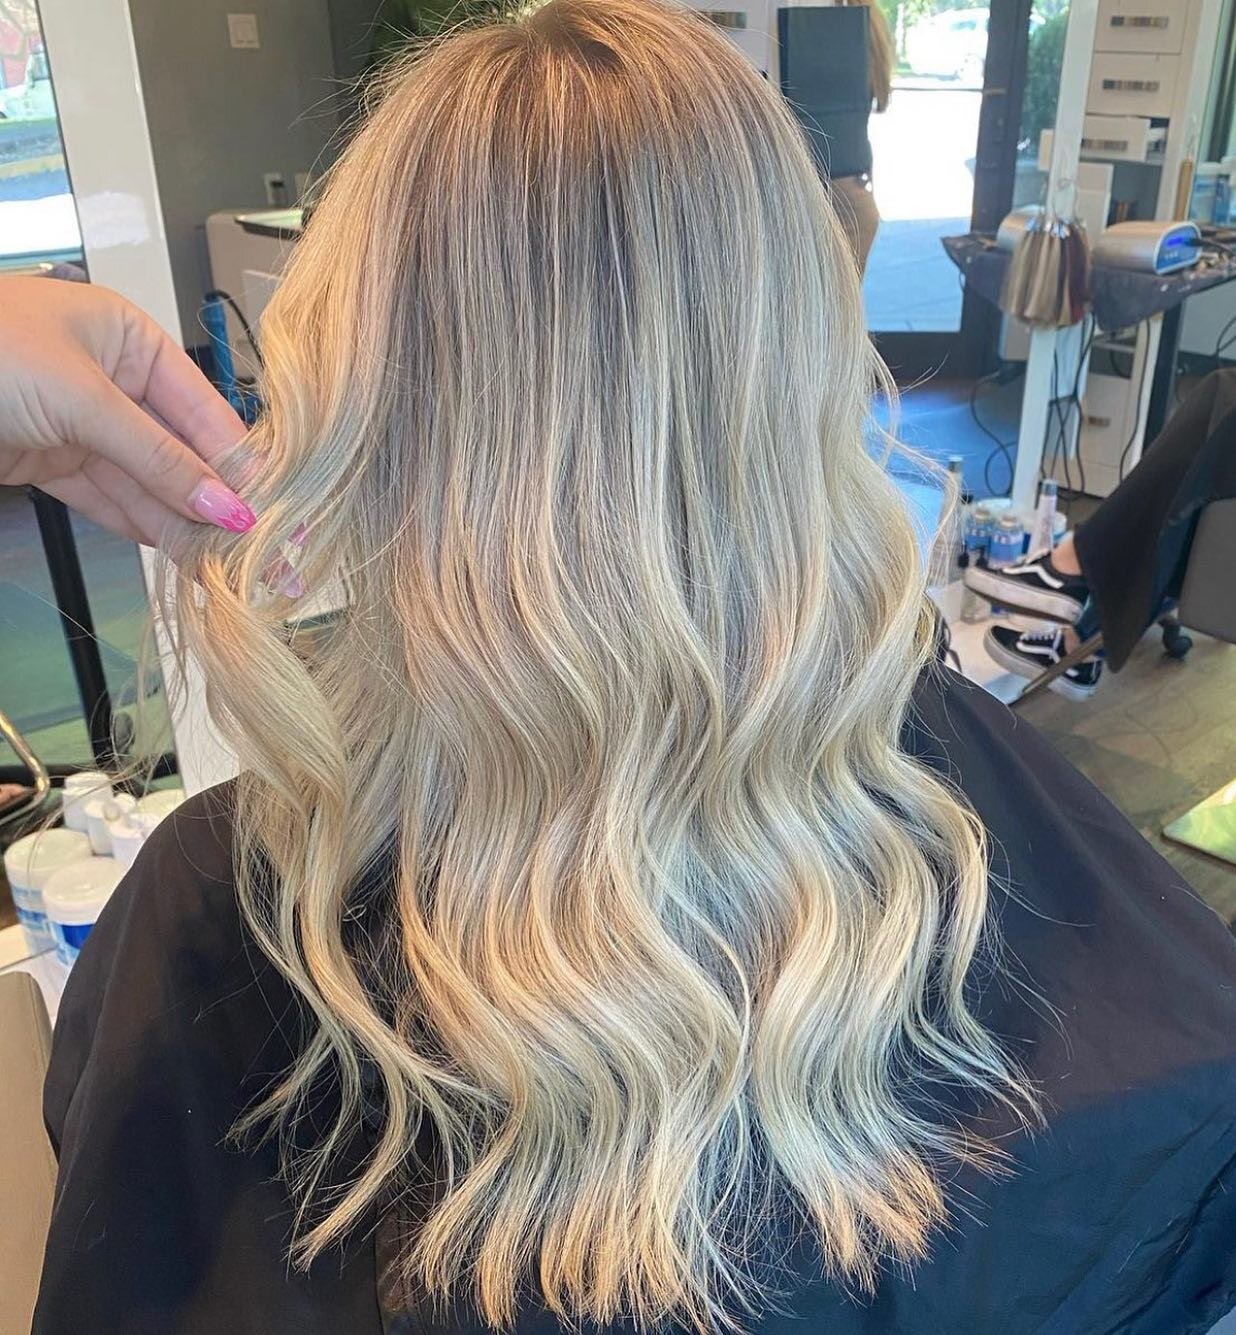 Blonde + summer = name a better duo. 
Hair by @hairbylisa.marie